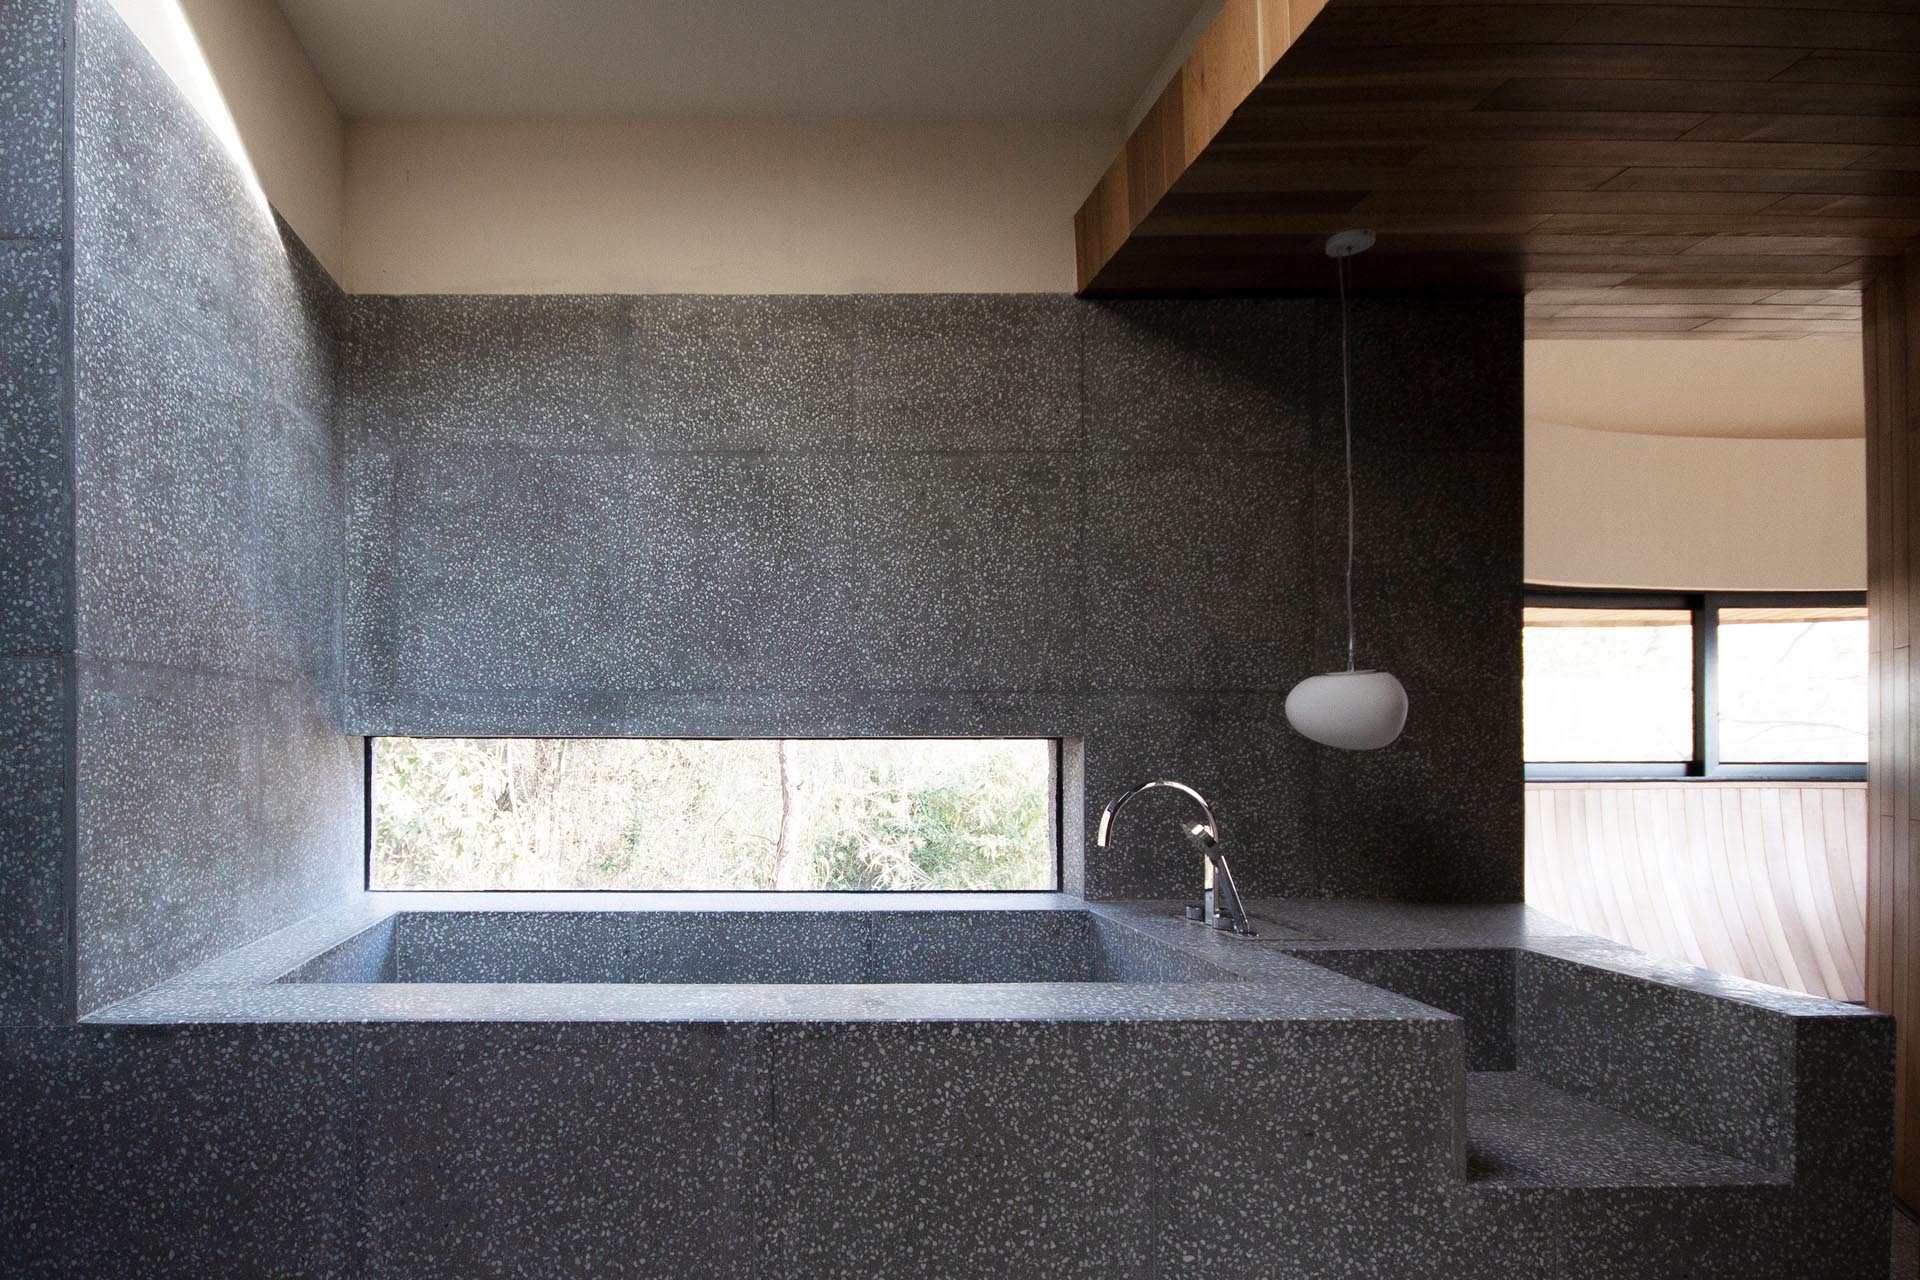 In this modern bathroom, there's a built-in bathtub with a horizontal window, which was designed to ensure privacy from the walking paths outside, while still allowing views of nature.